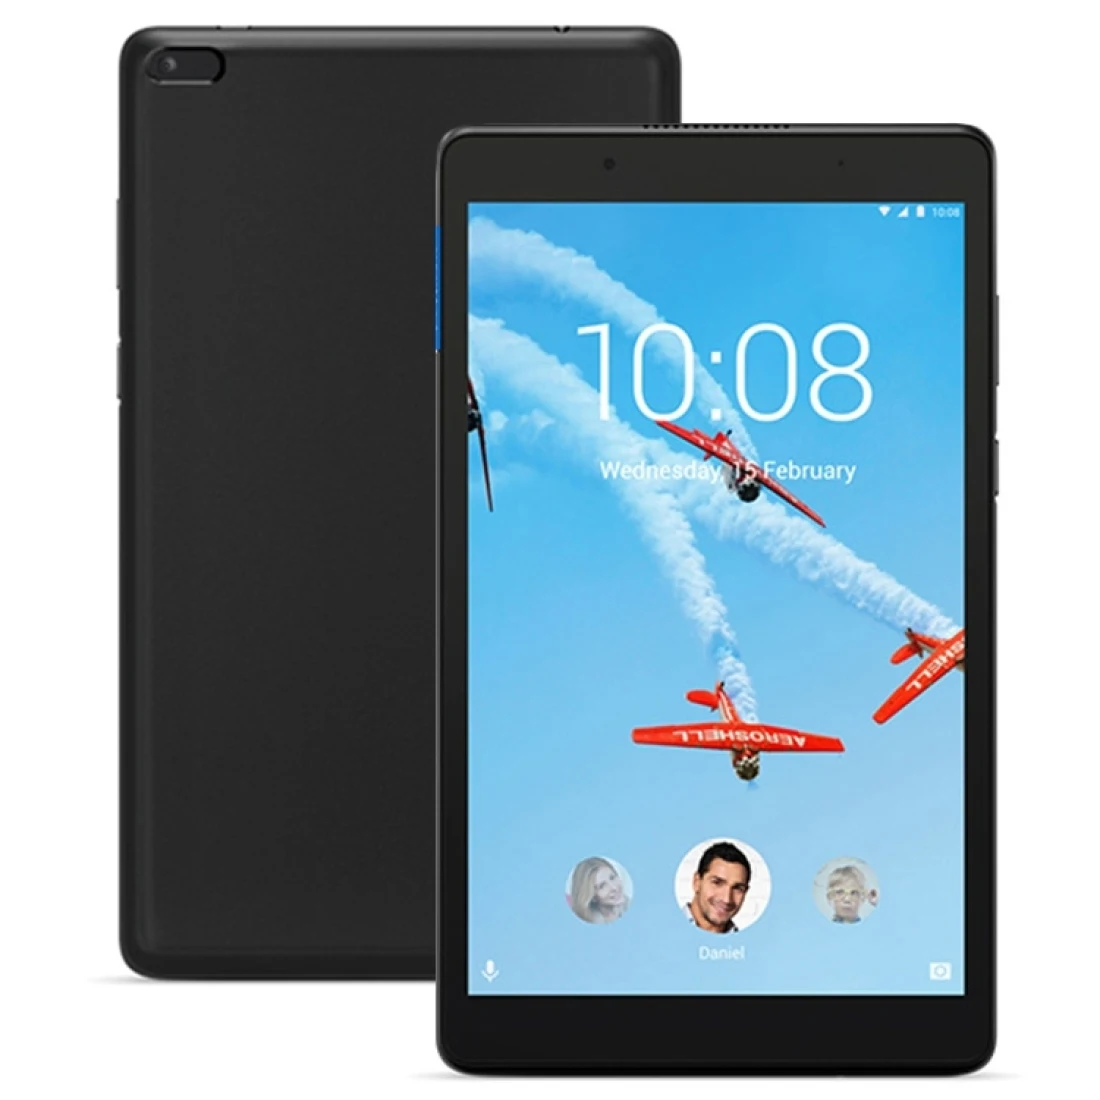 huawei latest tablet Lenovo E8 TB-8304F1 Tablet PC 8.0" 2GB+16GB MTK MT8163B Quad Core Android 7.0 WiFi Tablets GPS Dual Camera 4850mAh most popular tablet computer